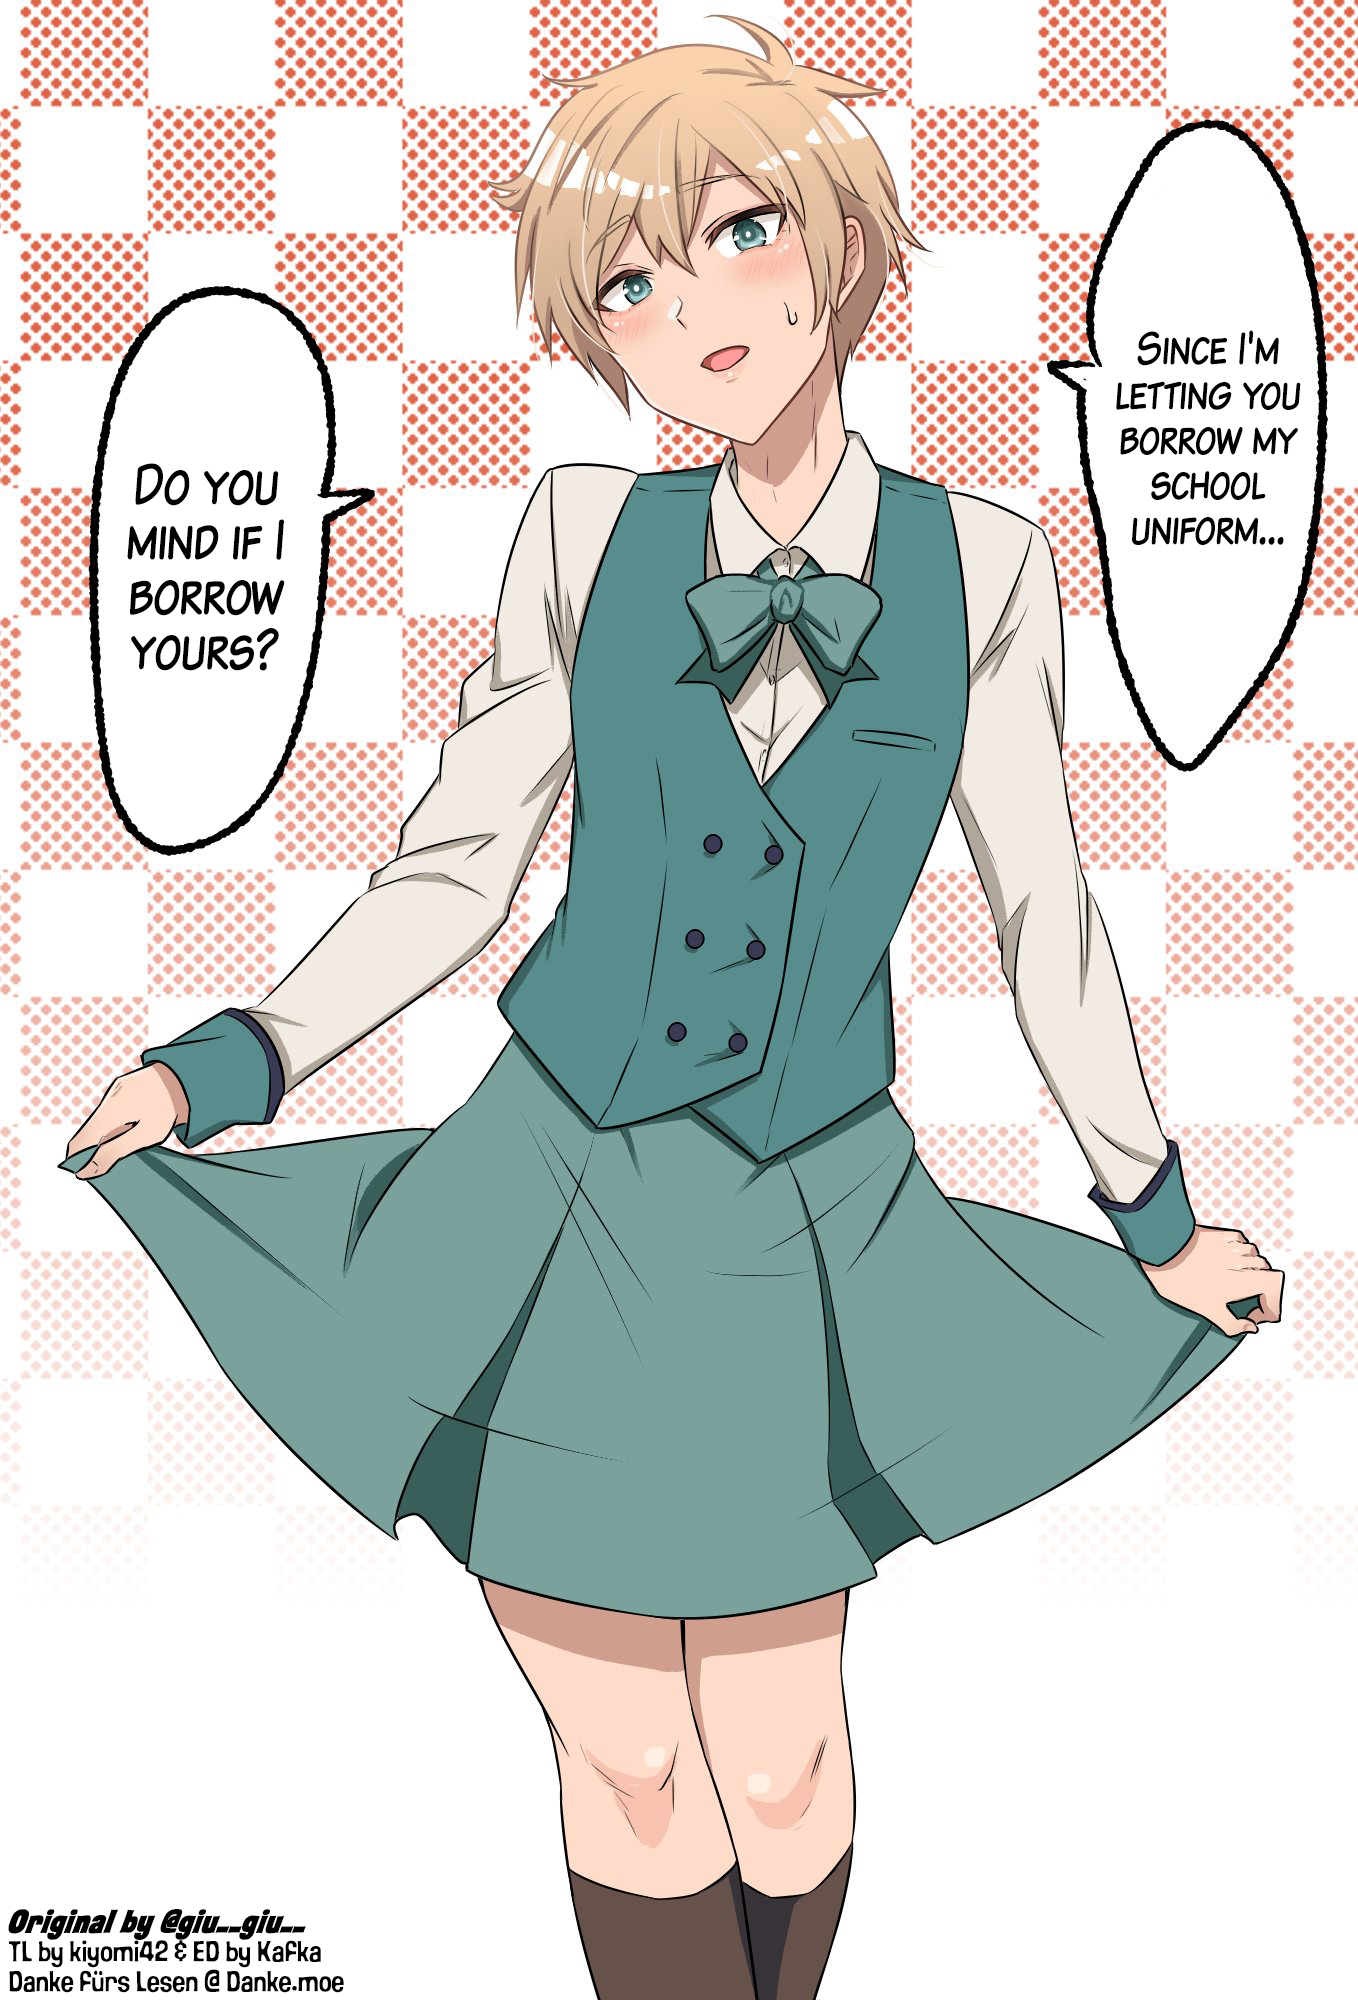 A Boy Who Wanted to Crossdress, and So Suggested to His Classmate That They Swap ClothesðŸ”ƒ manga